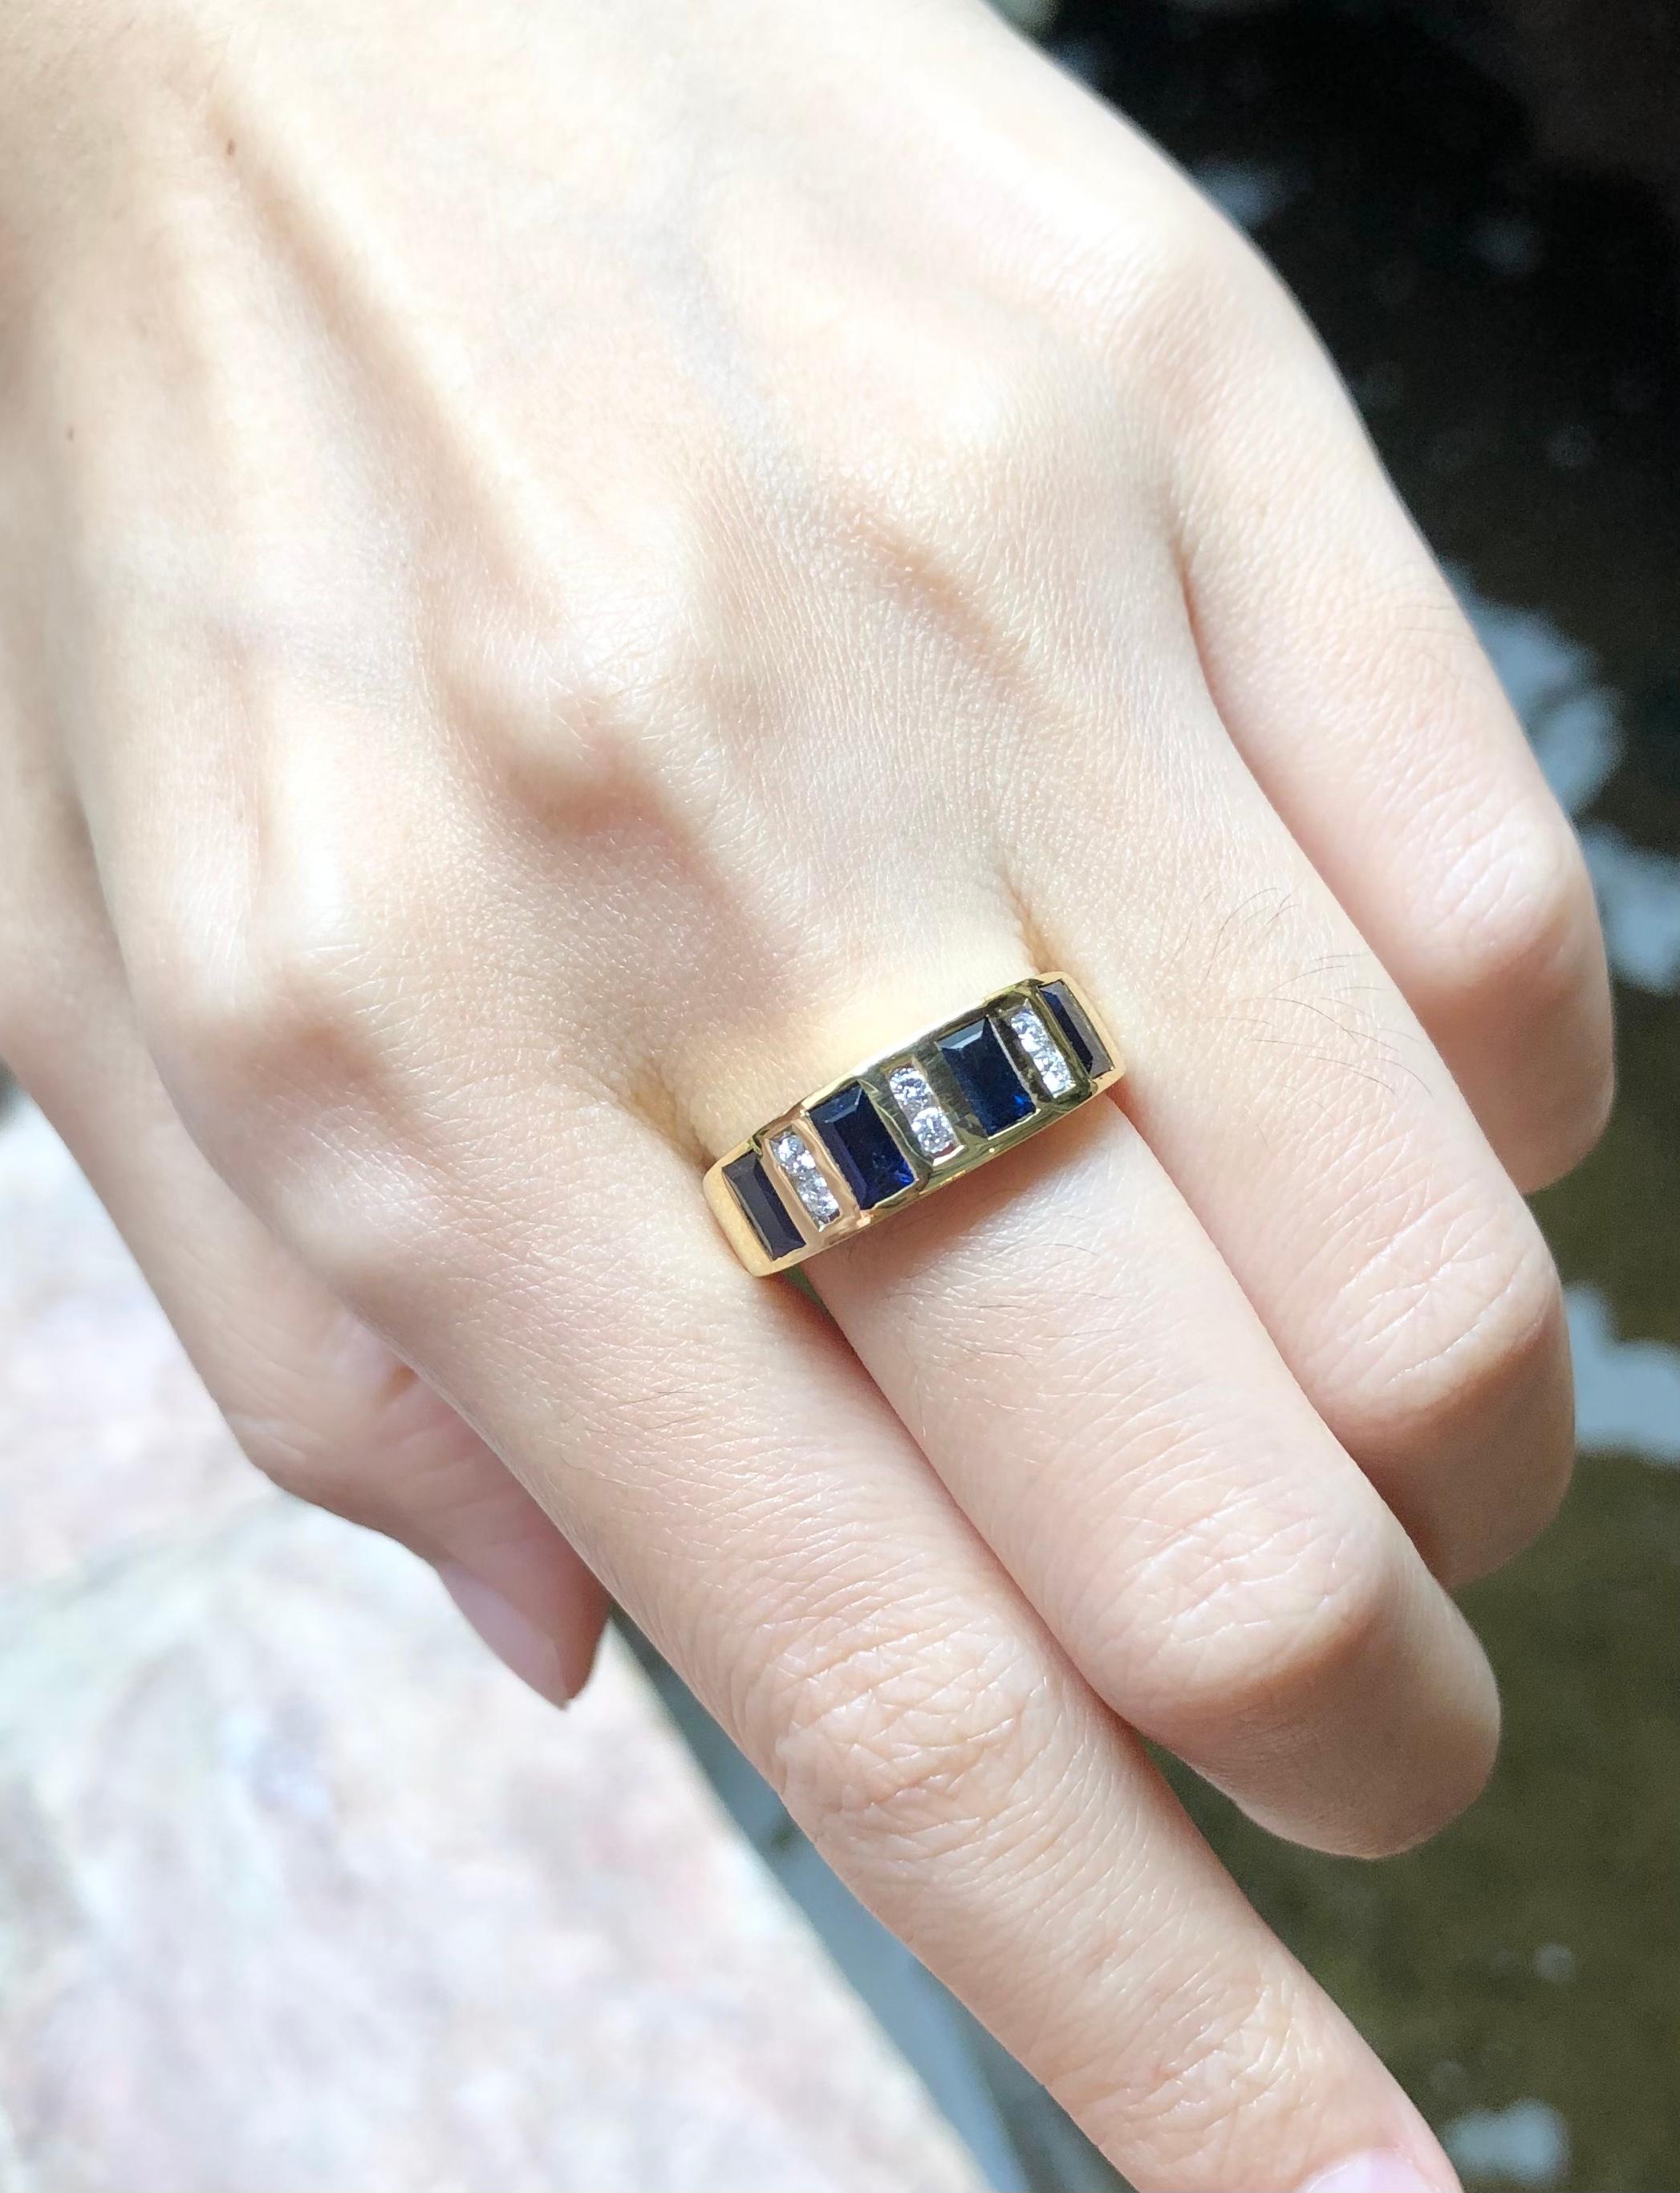 Blue Sapphire 1.64 carats with Diamond 014 carat Ring set in 18 Karat Gold Settings

Width:  1.9 cm 
Length: 0.6 cm
Ring Size: 55
Total Weight: 6.7 grams

